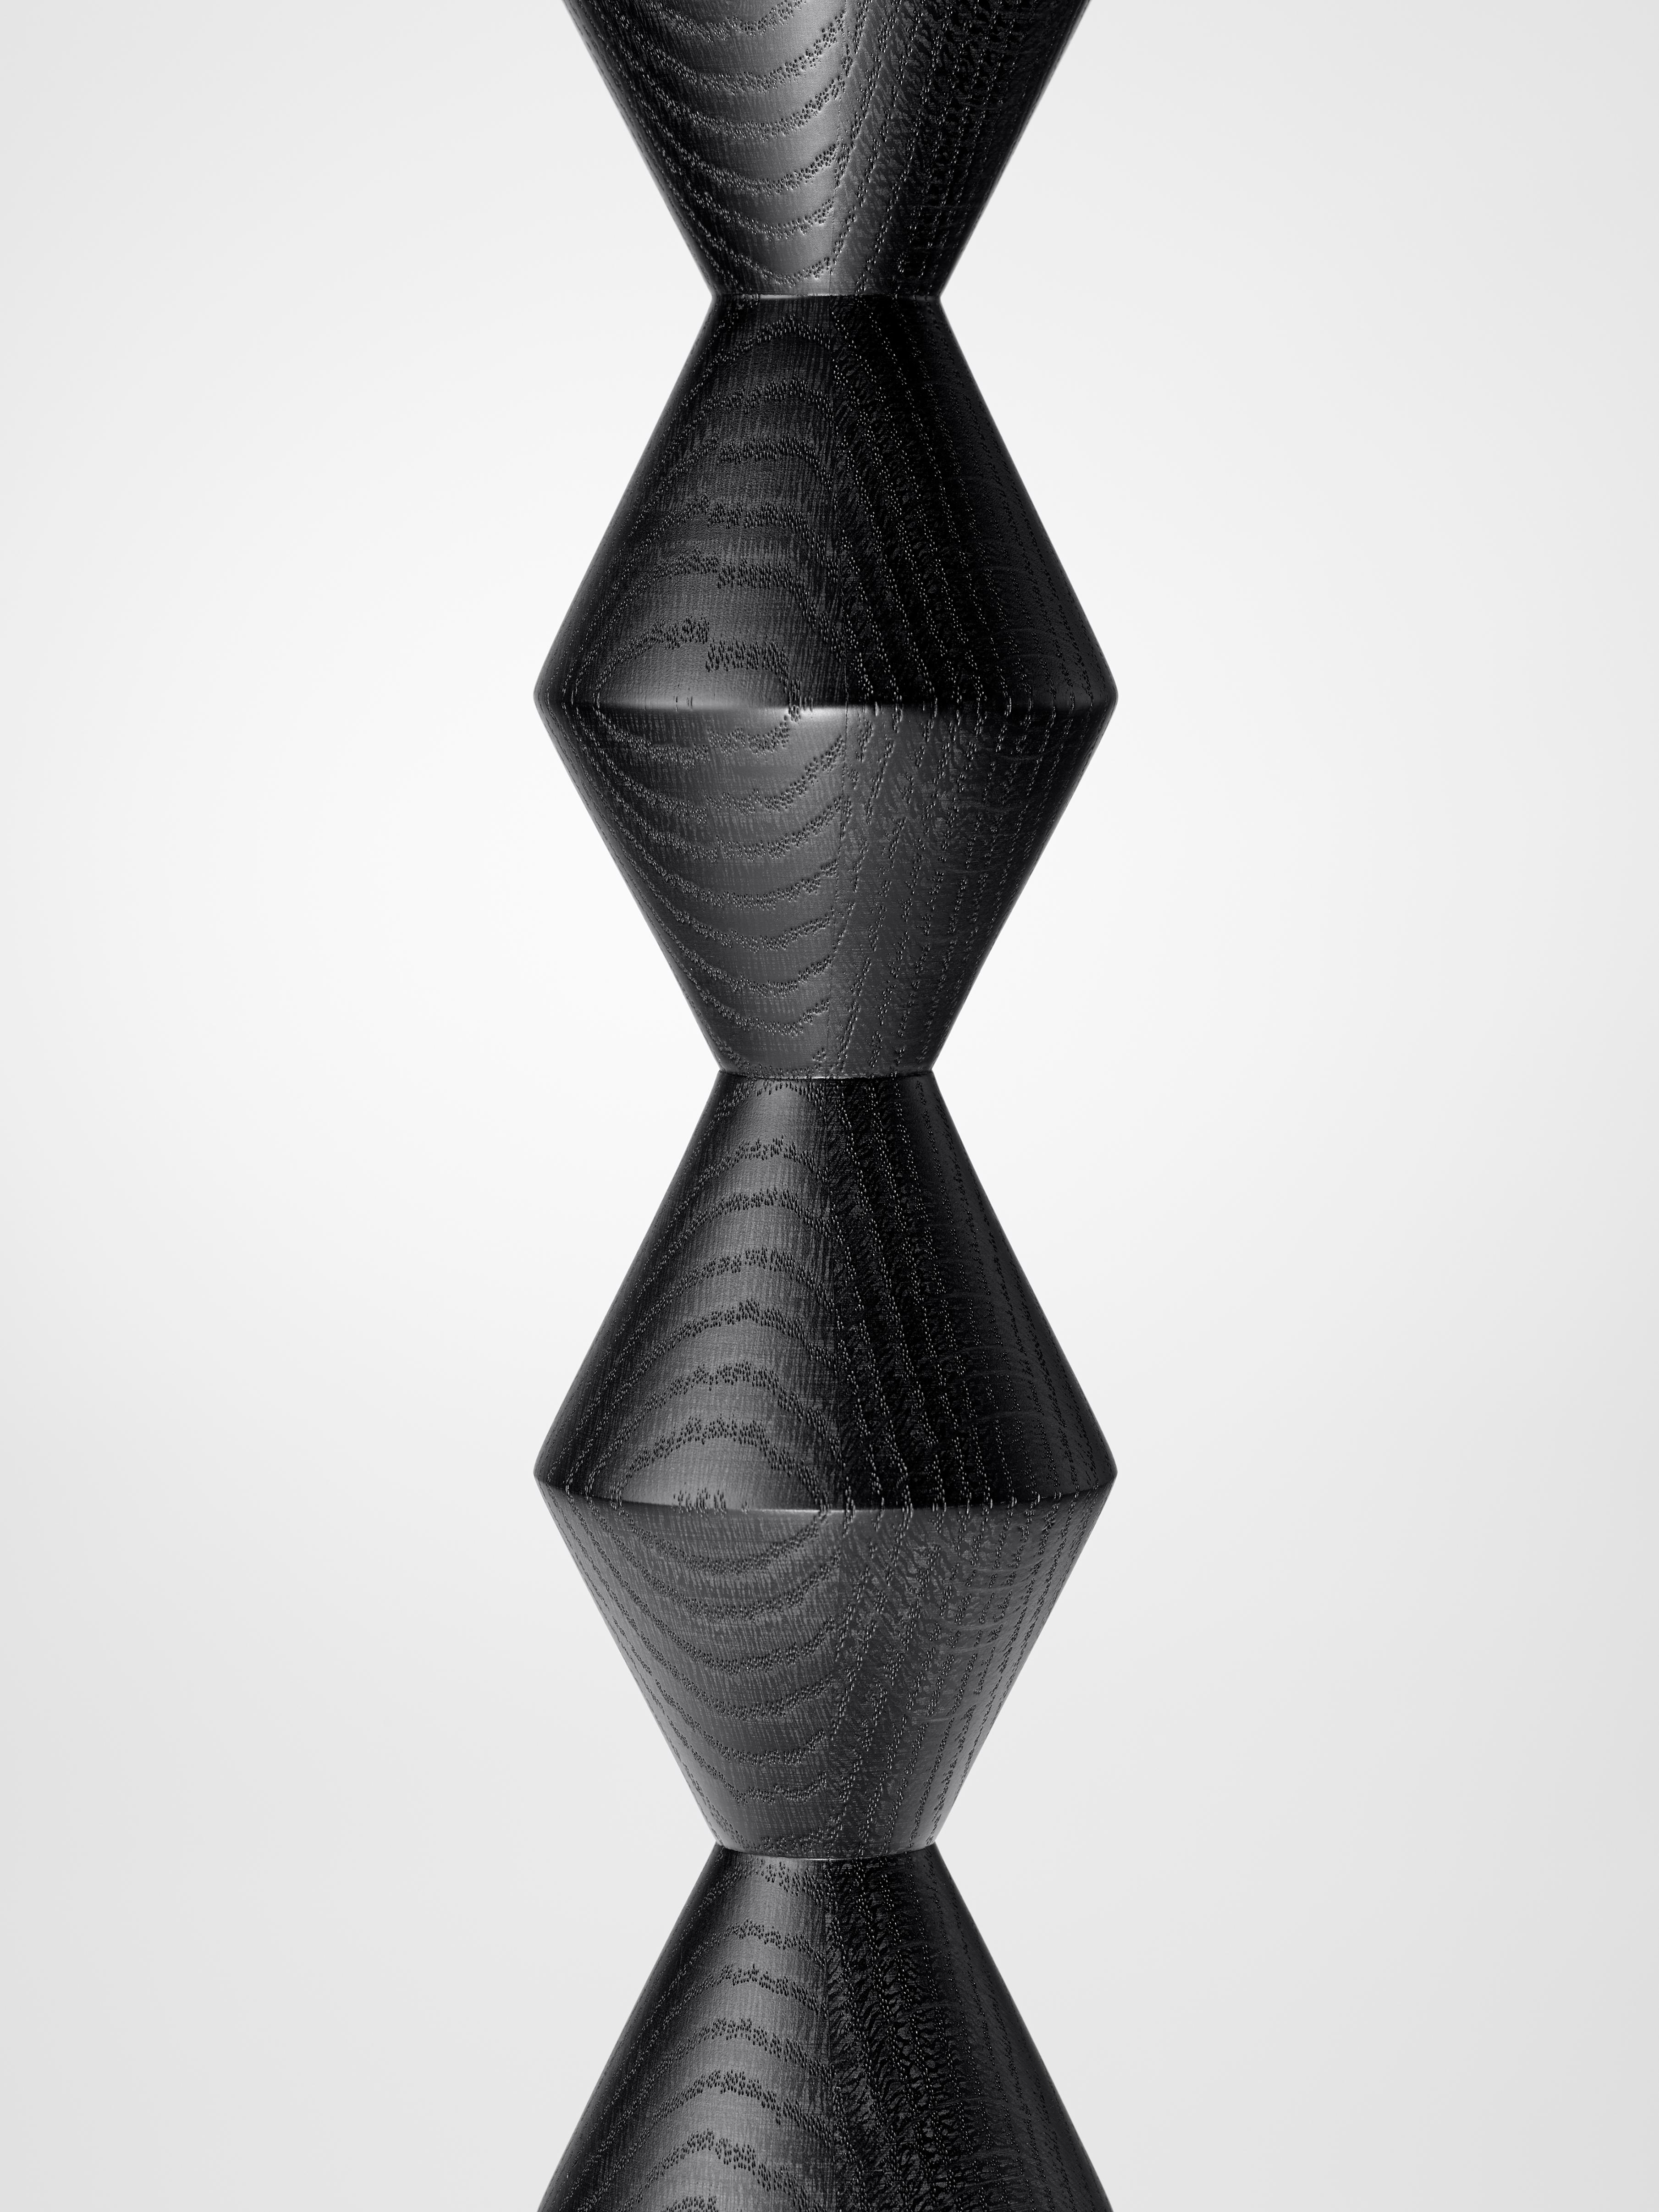 Ebonized Contemporary Zic-Zac Occasional Table in Oak or Walnut expertly lathe turned For Sale